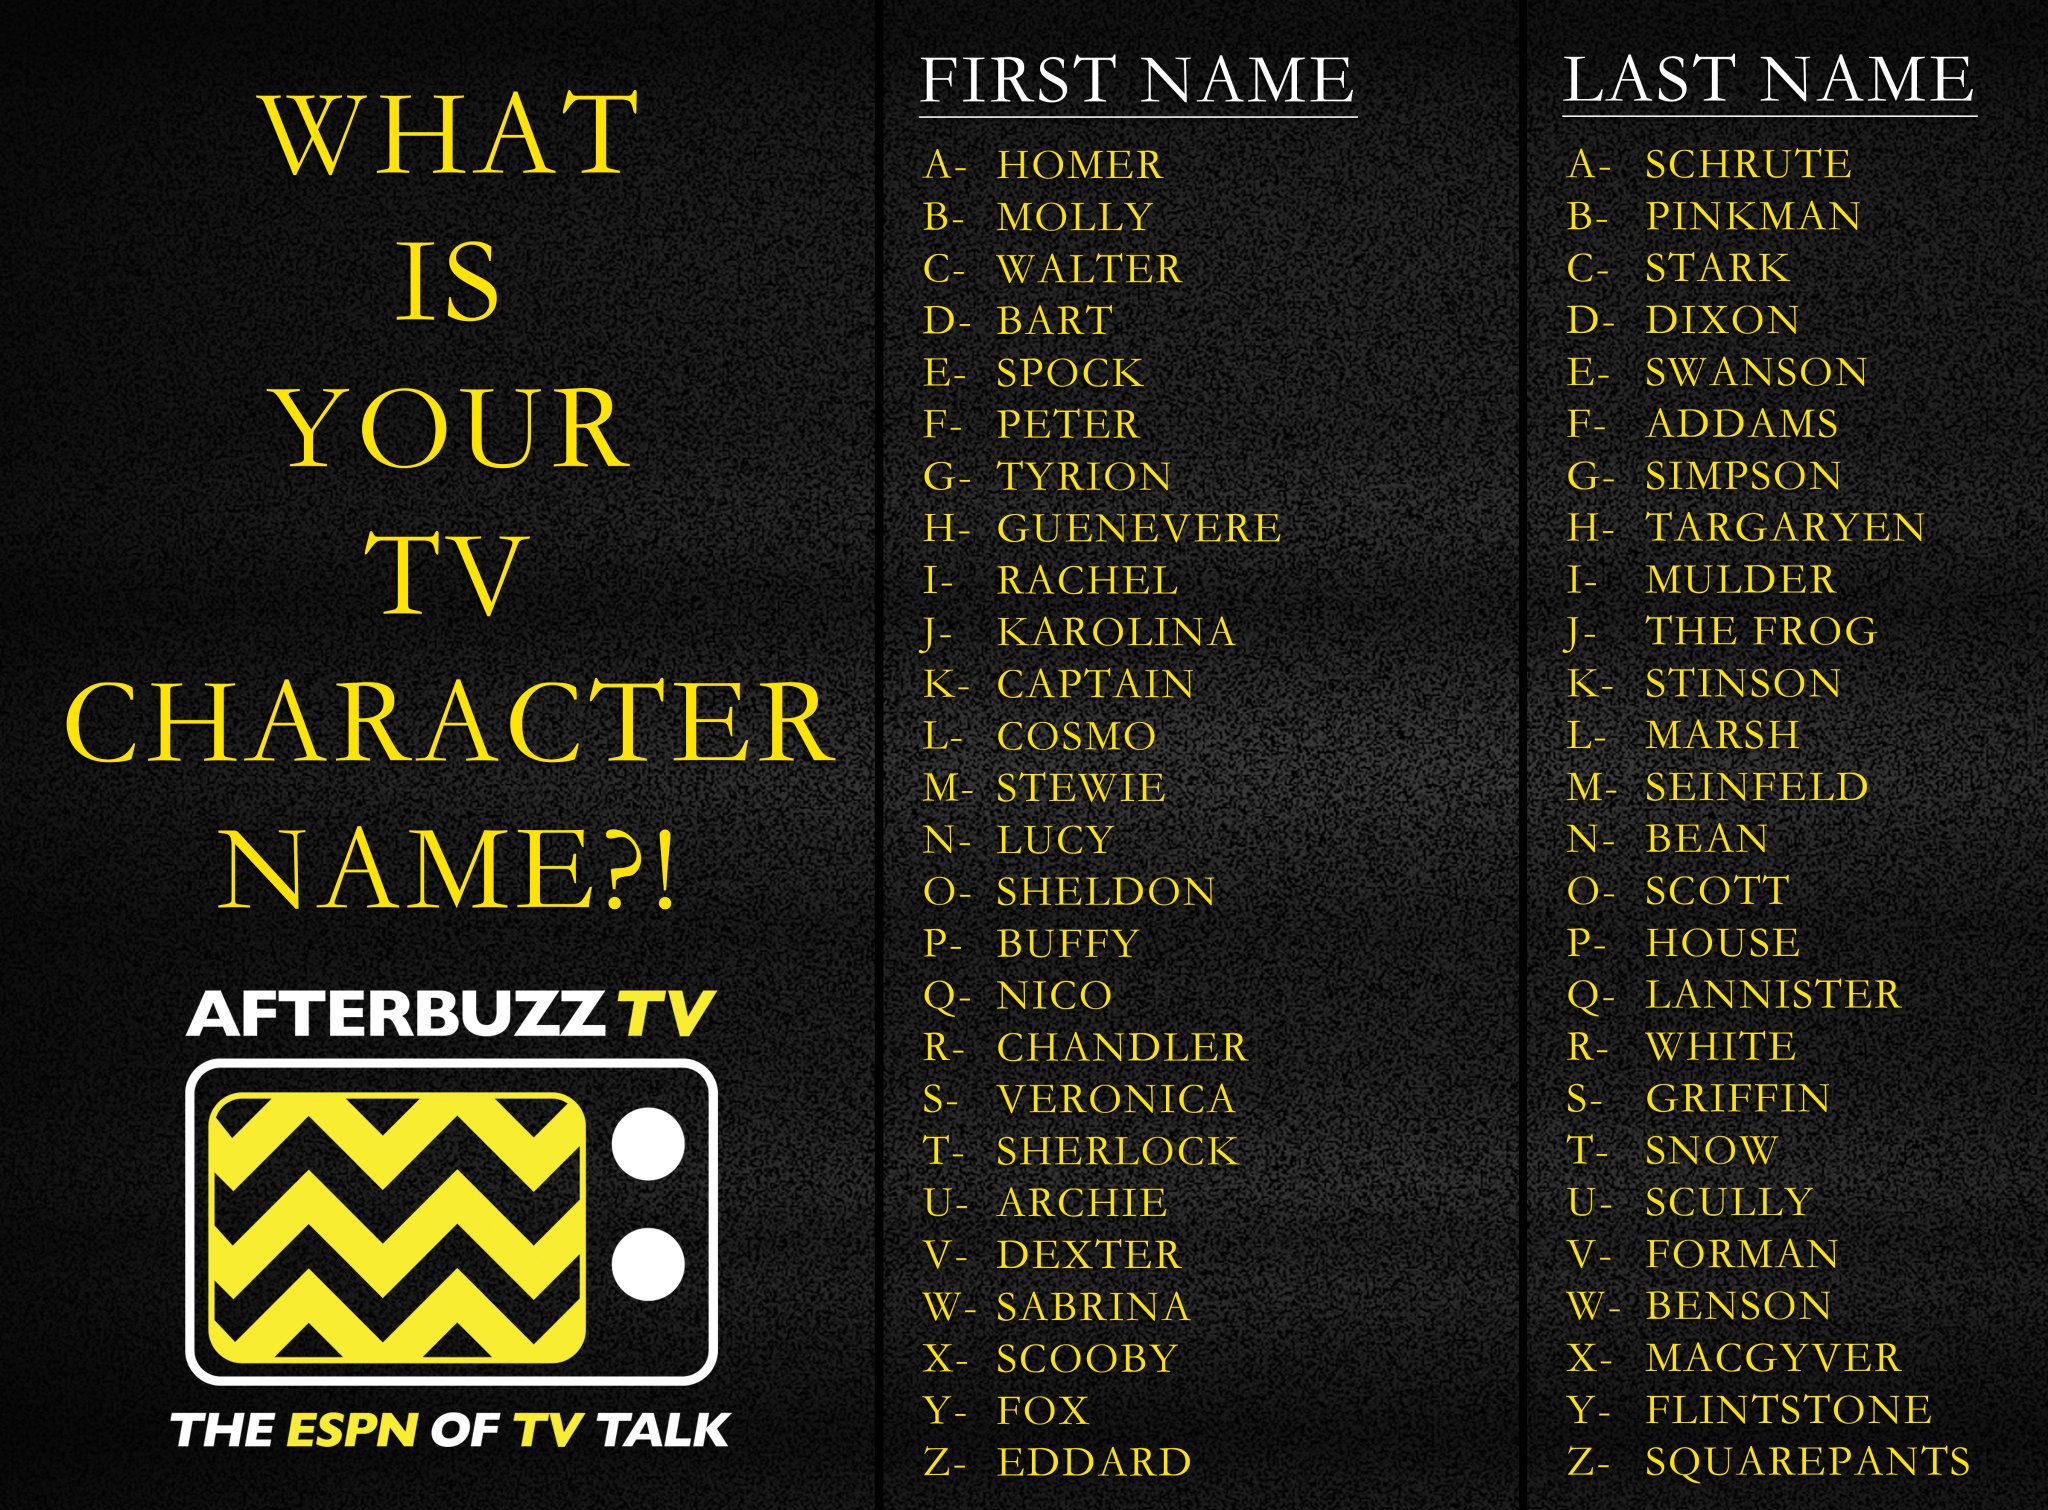 Afterbuzz Tv Ever Dreamed Of Being On A Tv Show Ever Thought Of What Your Character Name Would Be Find Out Today And Tell Us What You Get Afterbuzz Tv S